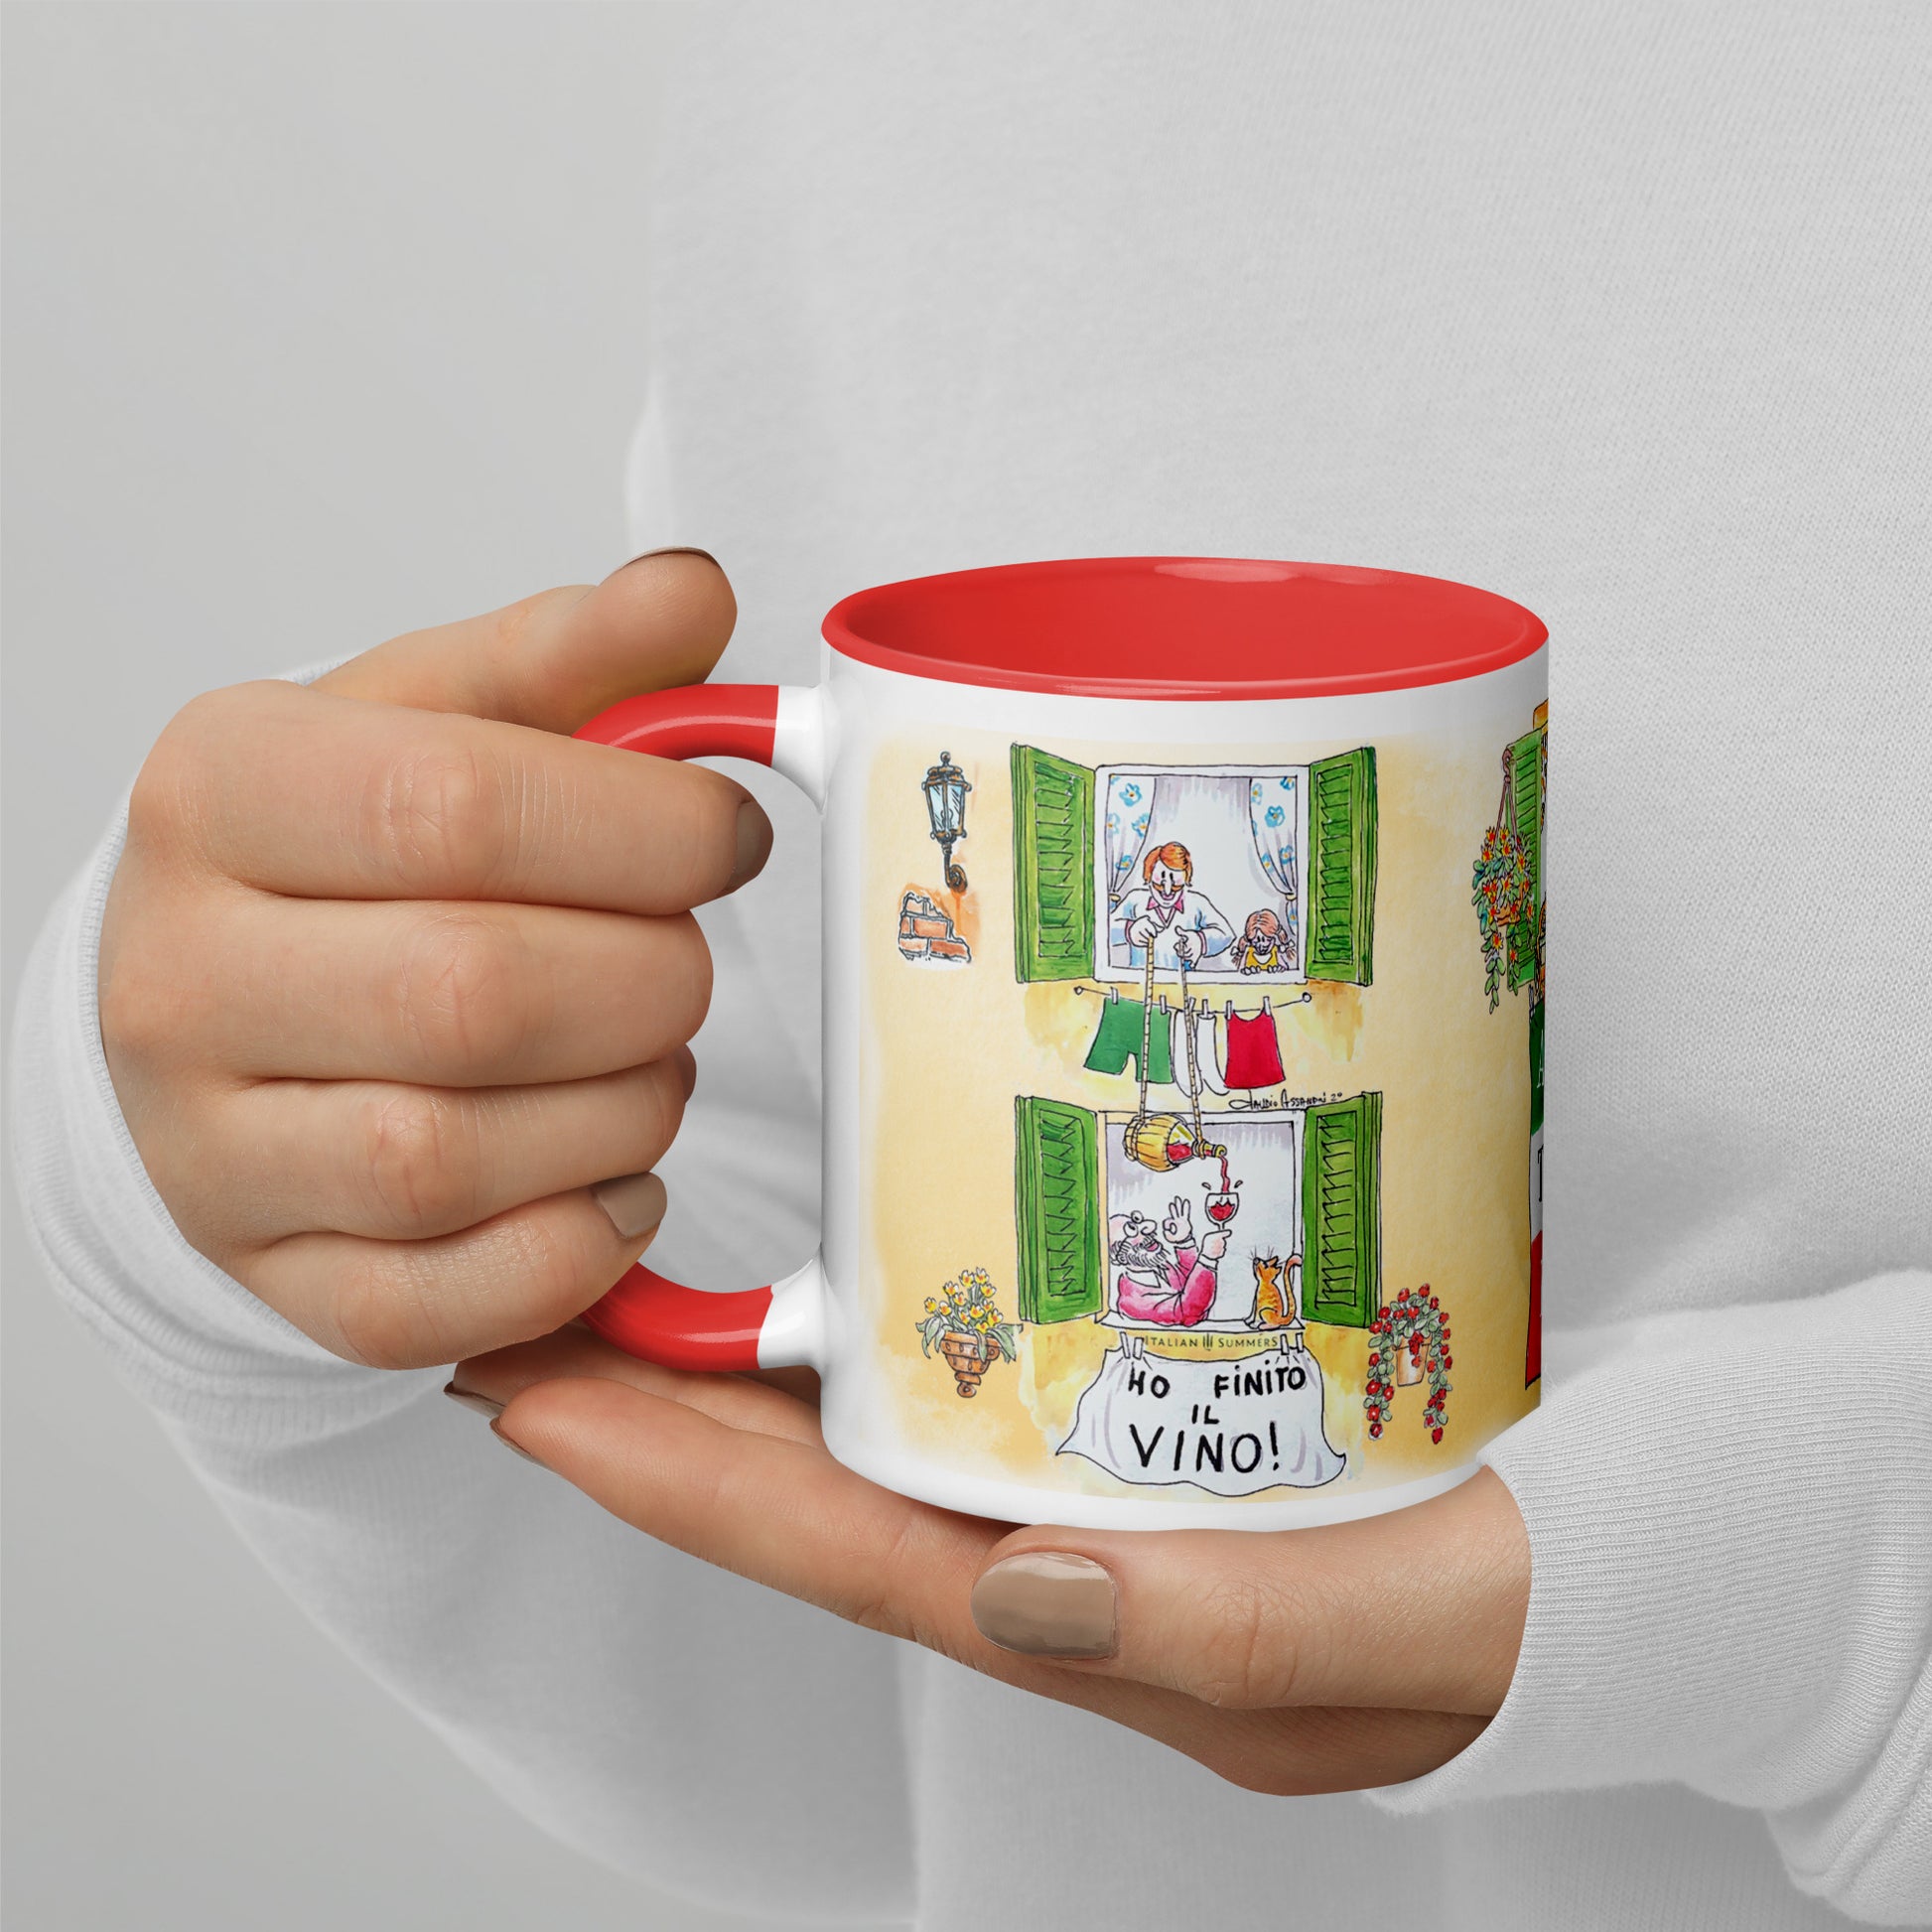 Italy inspired mug with sketches of Italian lifestyle. A sketch of two Italian windows where the downstairs neighbour is without vino. He holds the glas up, out of the window and the upstairs neughbour lowers a flask of good Chinti wine to share some good cheer. Italian solidarity at play! :-) The mug has a yellow or red inside/handle. Made by Italian Summers